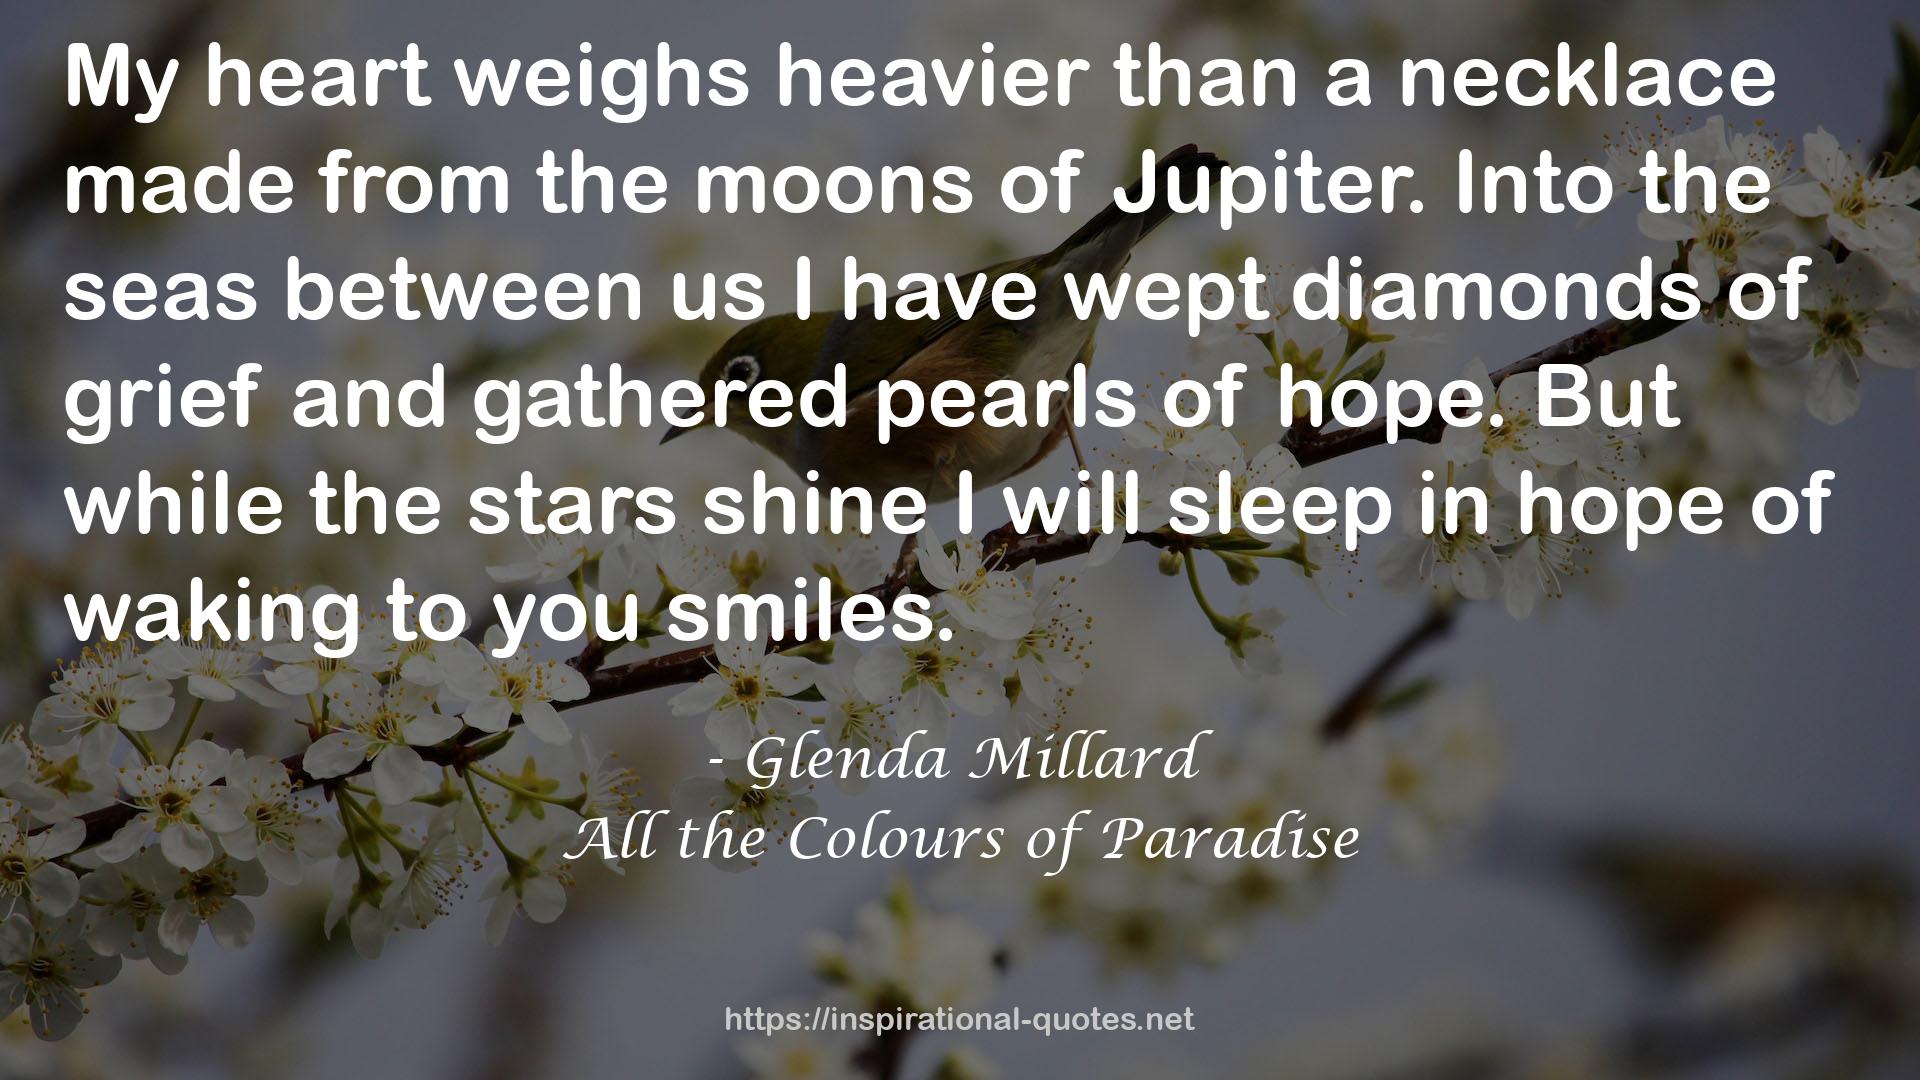 All the Colours of Paradise QUOTES